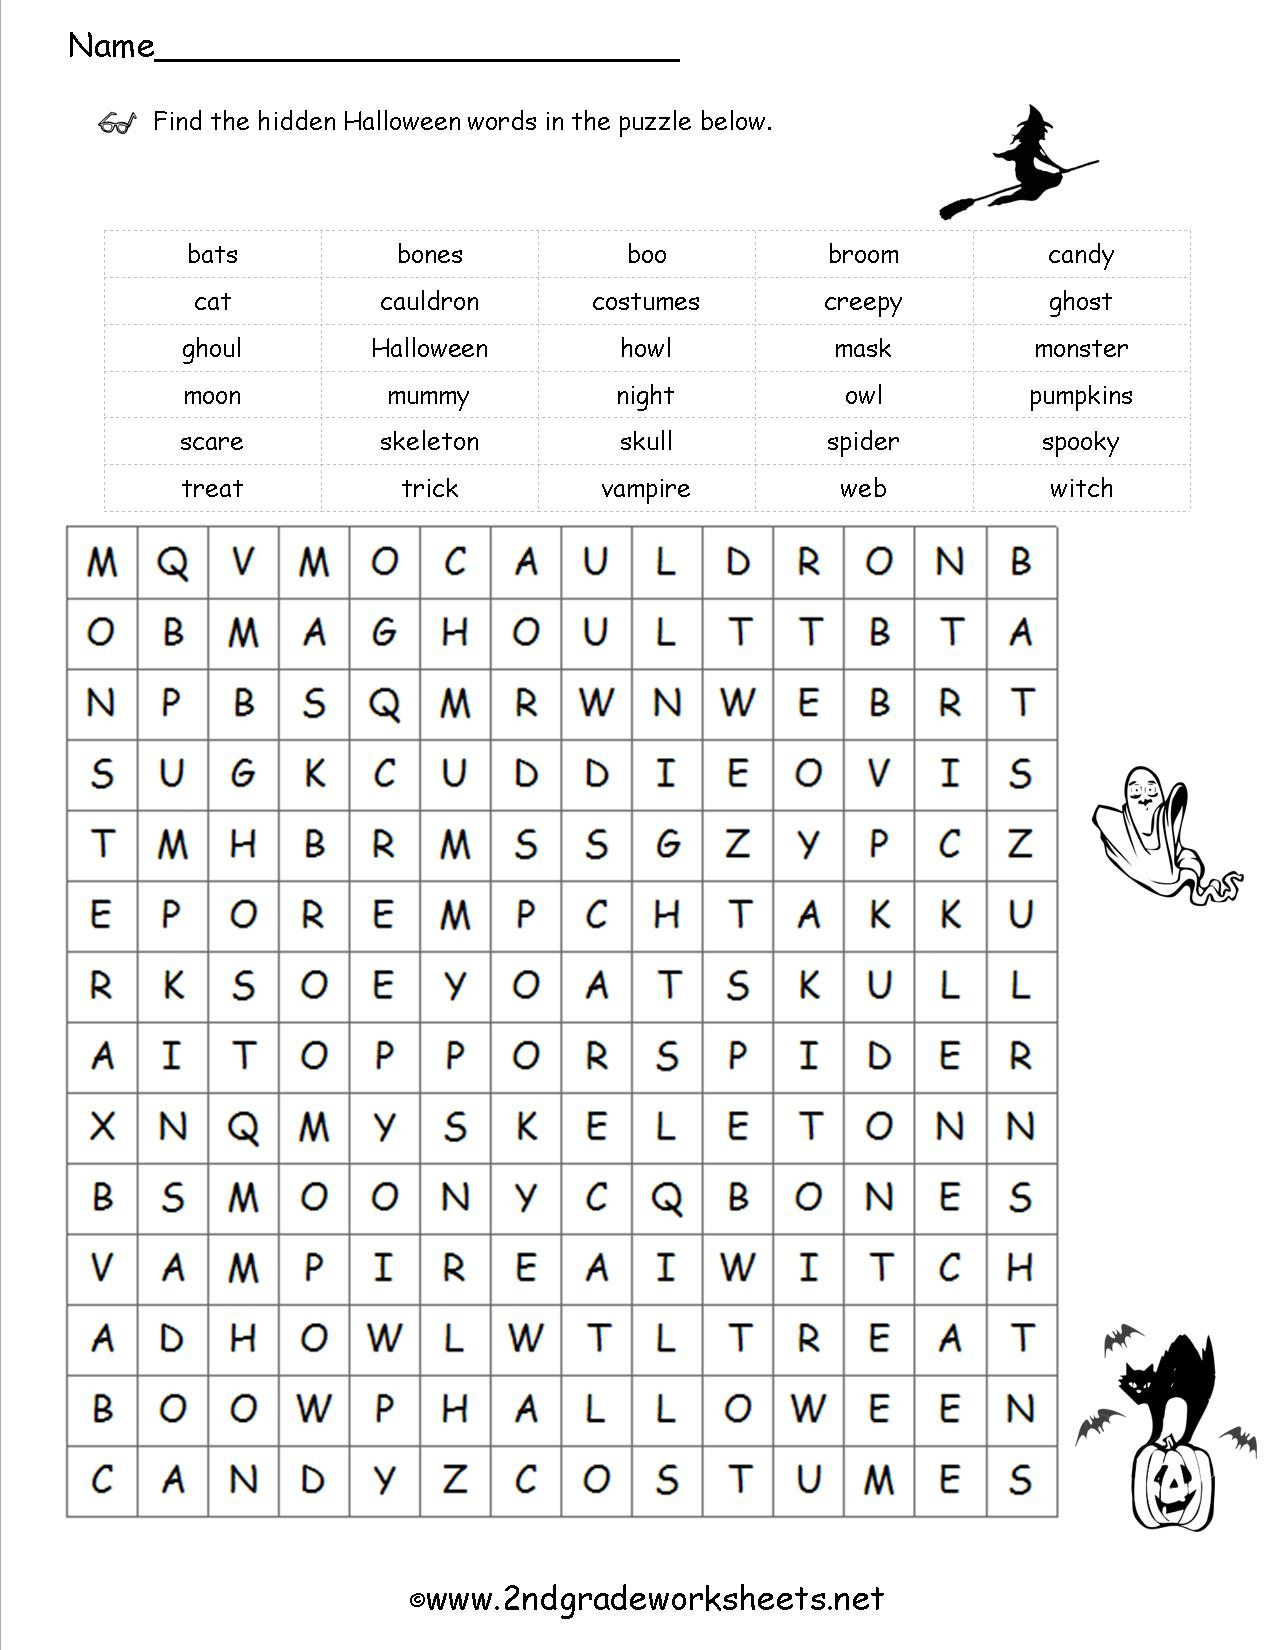 Halloween Worksheets And Printouts - Printable Halloween Puzzle Pages